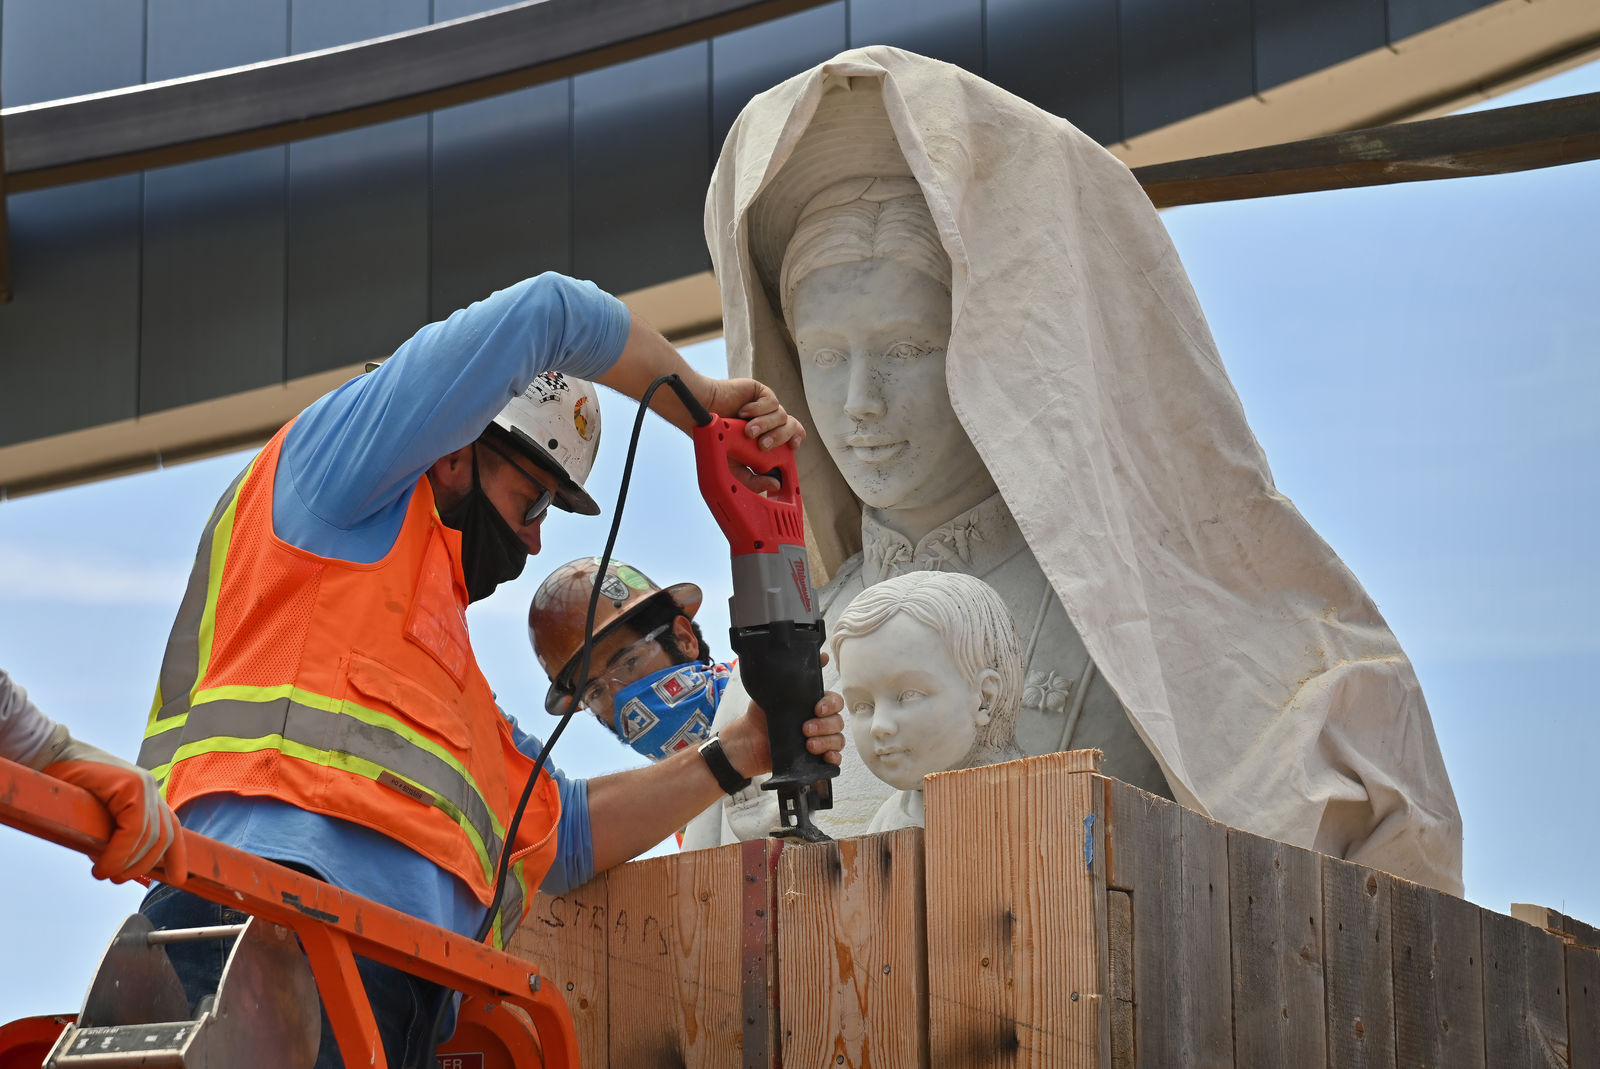 A statue of Mary and baby Jesus is unboxed and prepared for installation in Christ Cathedral’s new Catholic Vietnamese memorial being built on the campus. Photo courtesy Diocese of Orange. Note: Photo taken during construction.